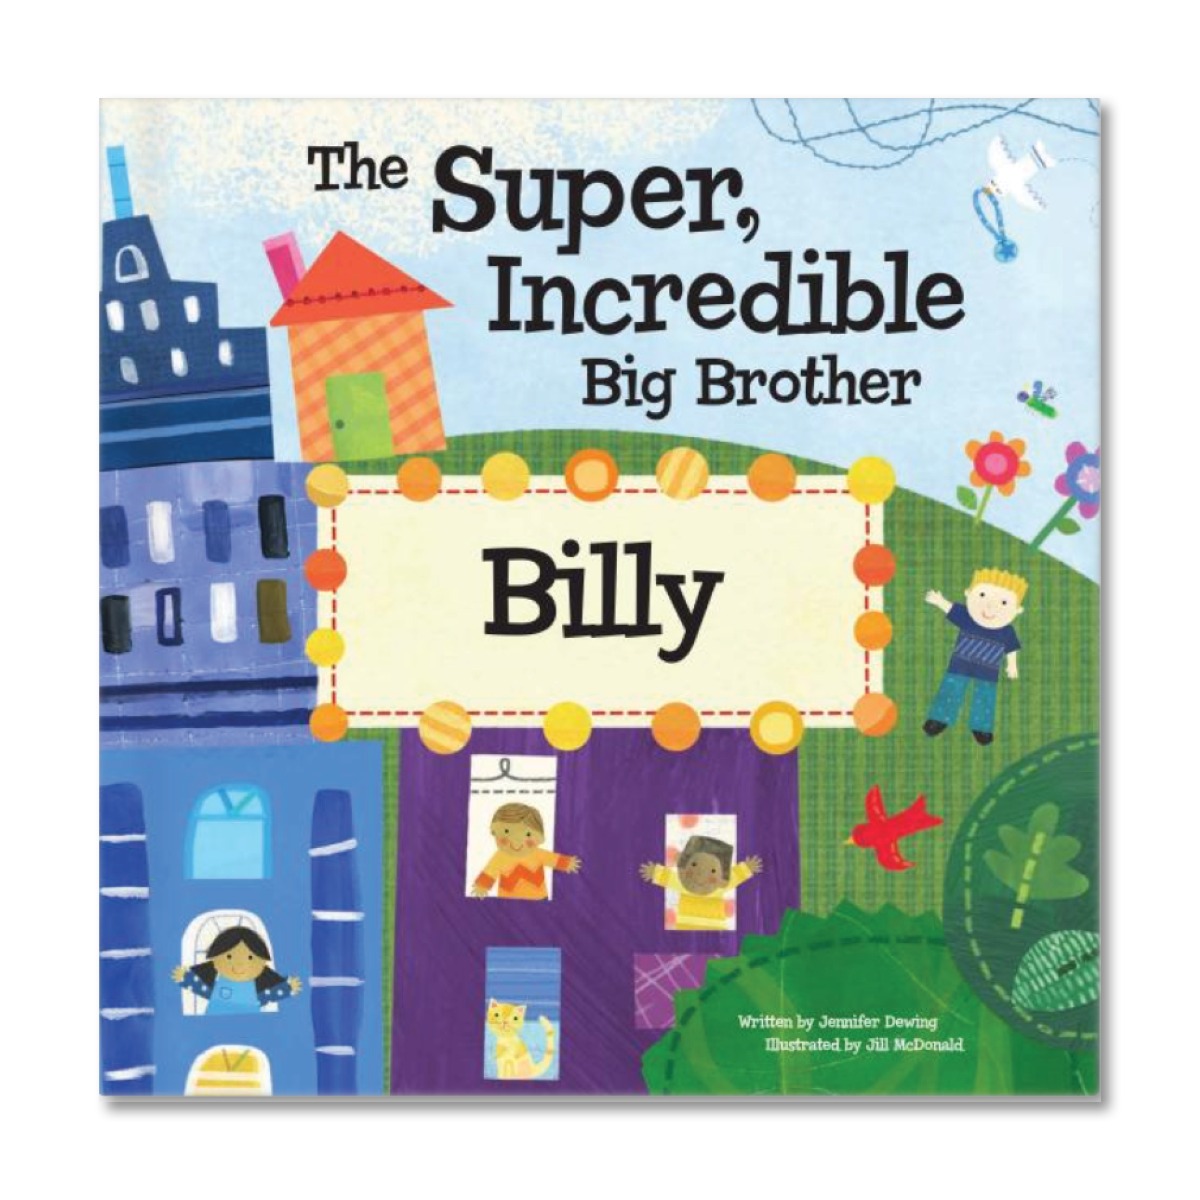 The Super, Incredible Big Brother Personalized Book and Medal